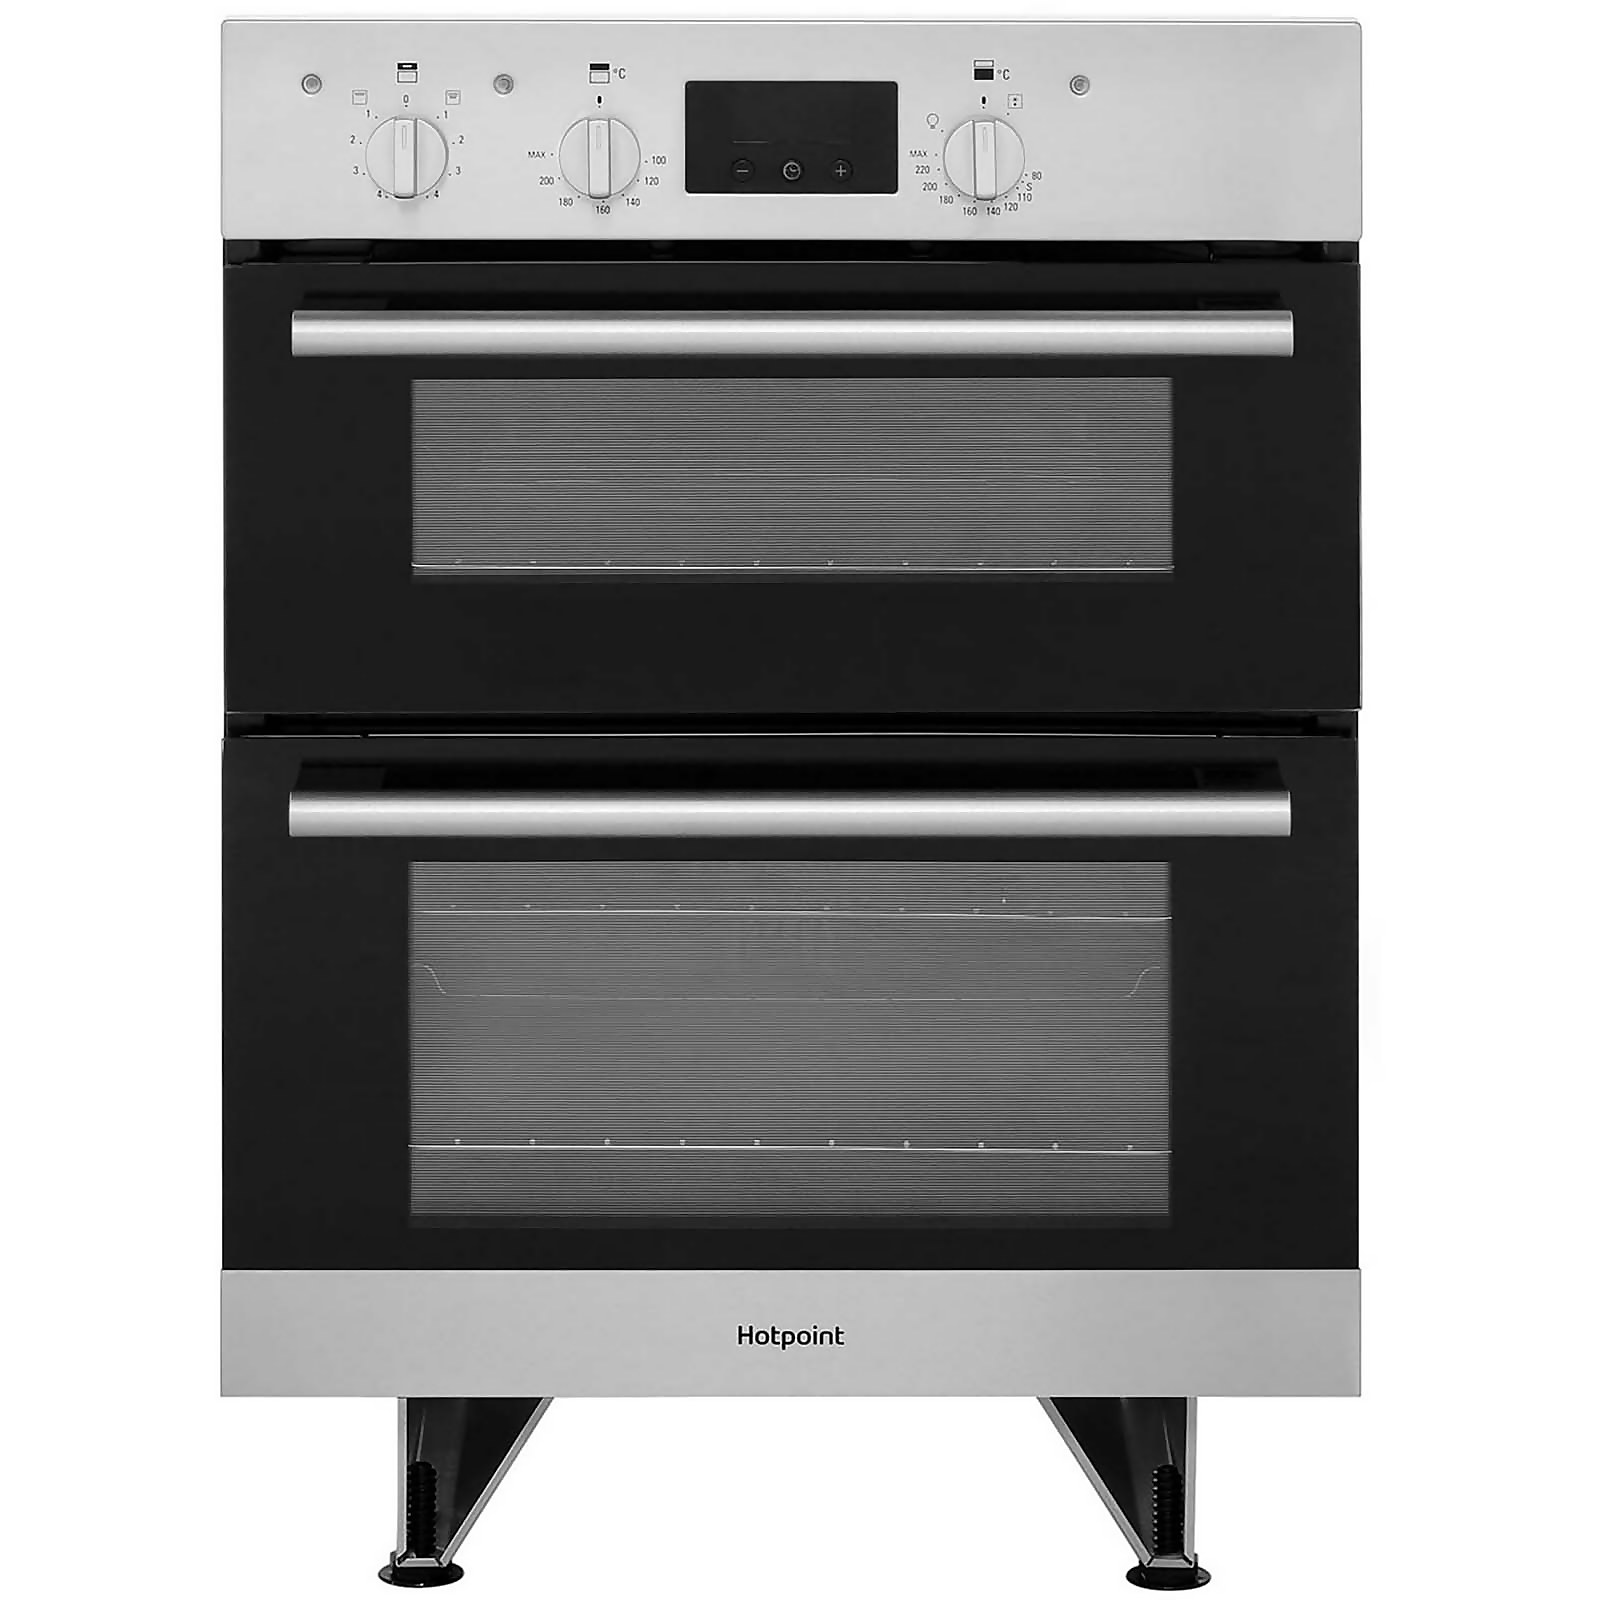 Photo of Hotpoint Class 2 Du2540ix Built Under Electric Double Oven With Feet - Stainless Steel